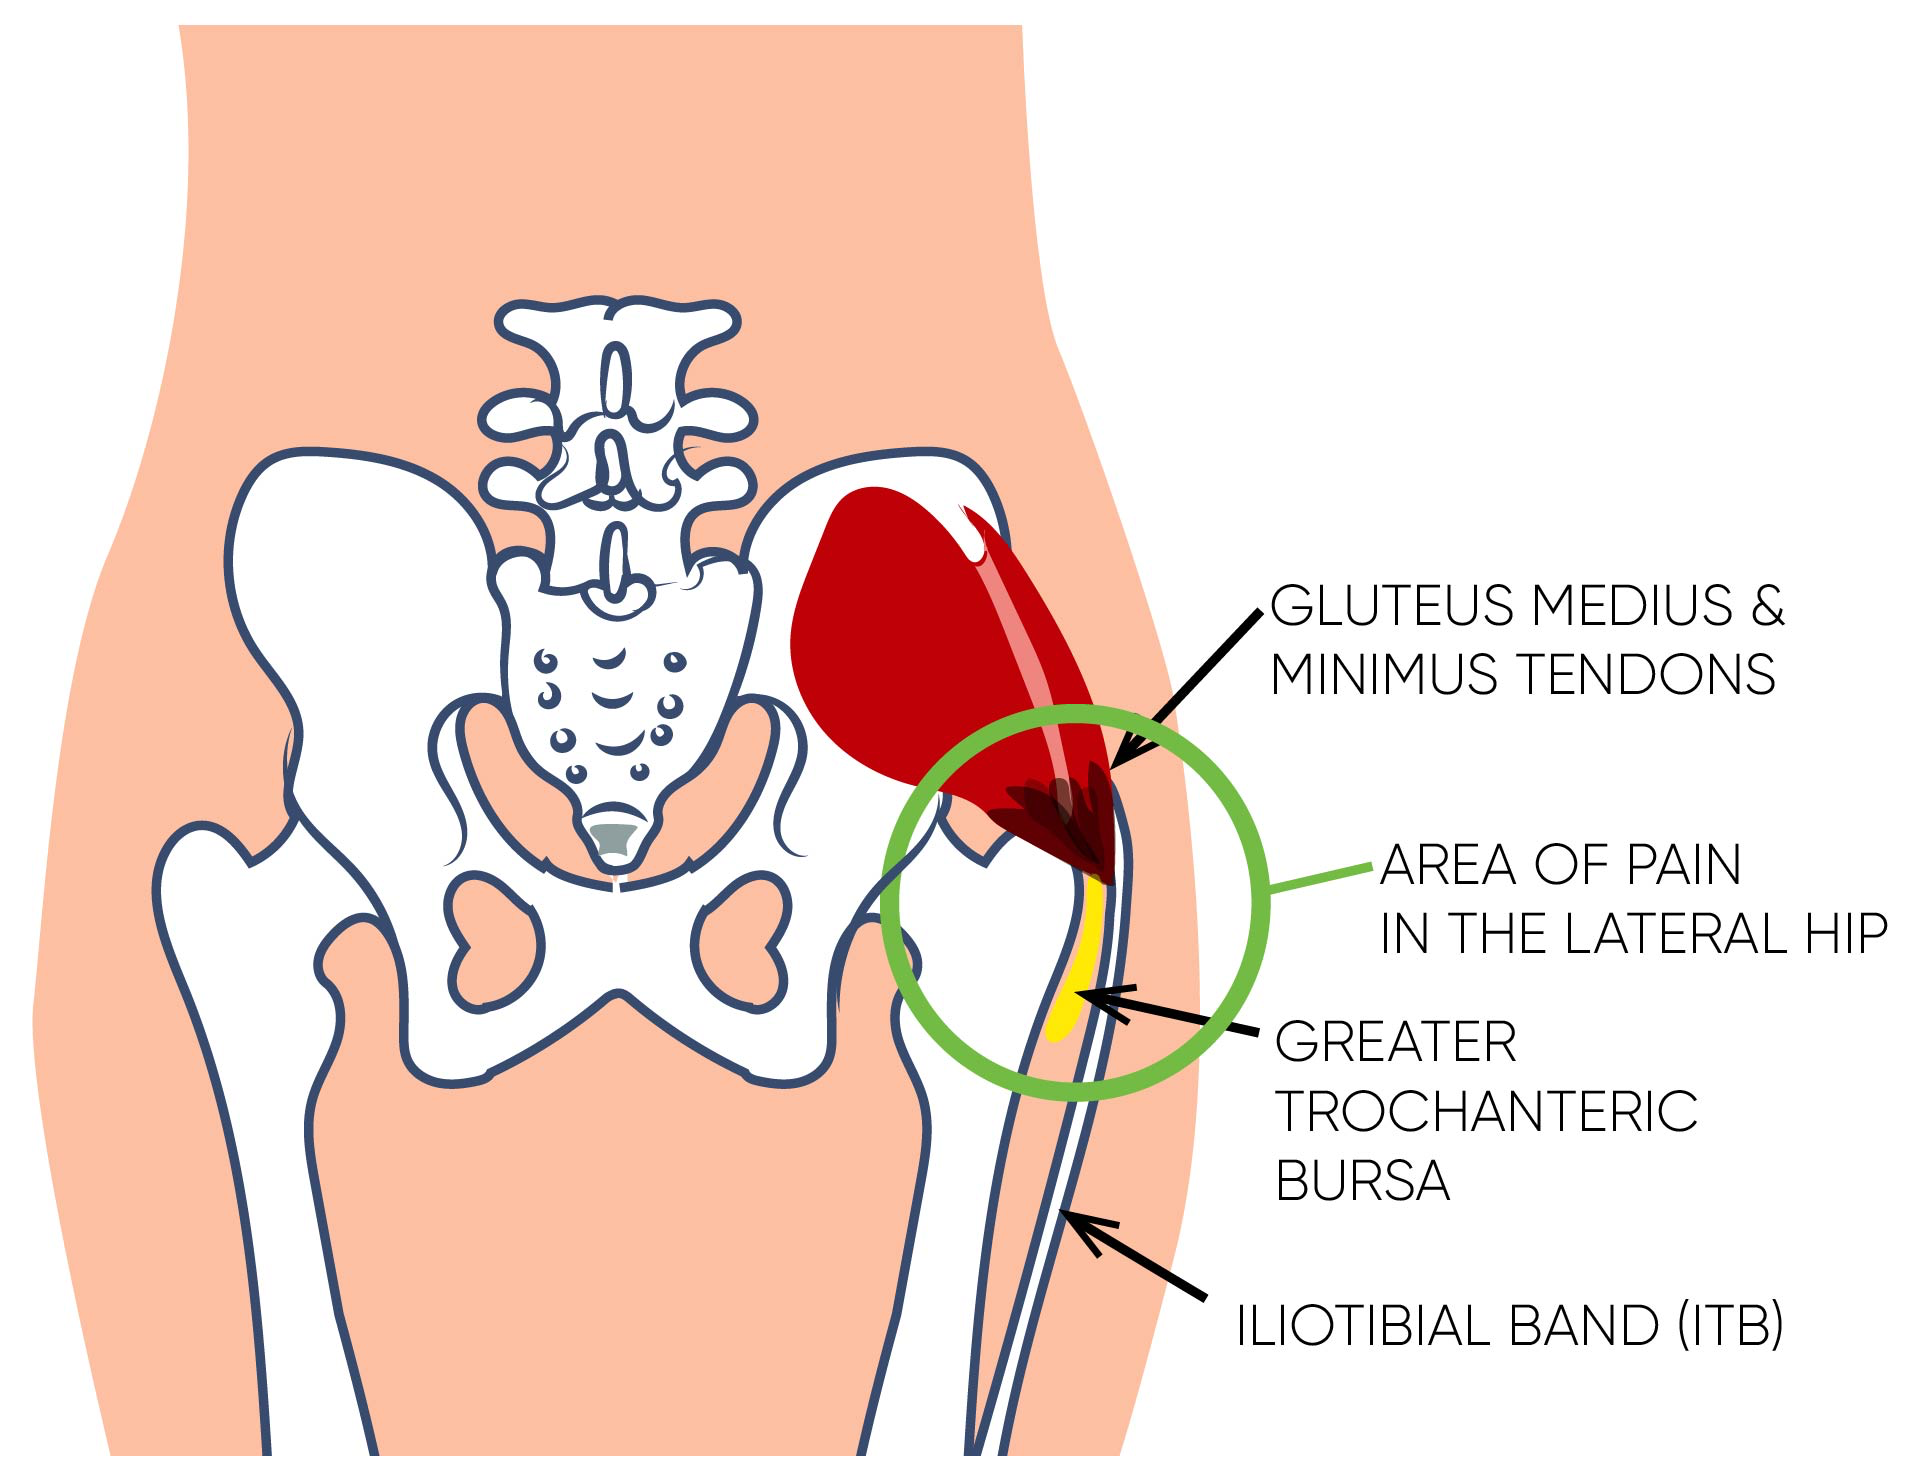 Normal anatomy of the lateral hip region. The gluteus medius